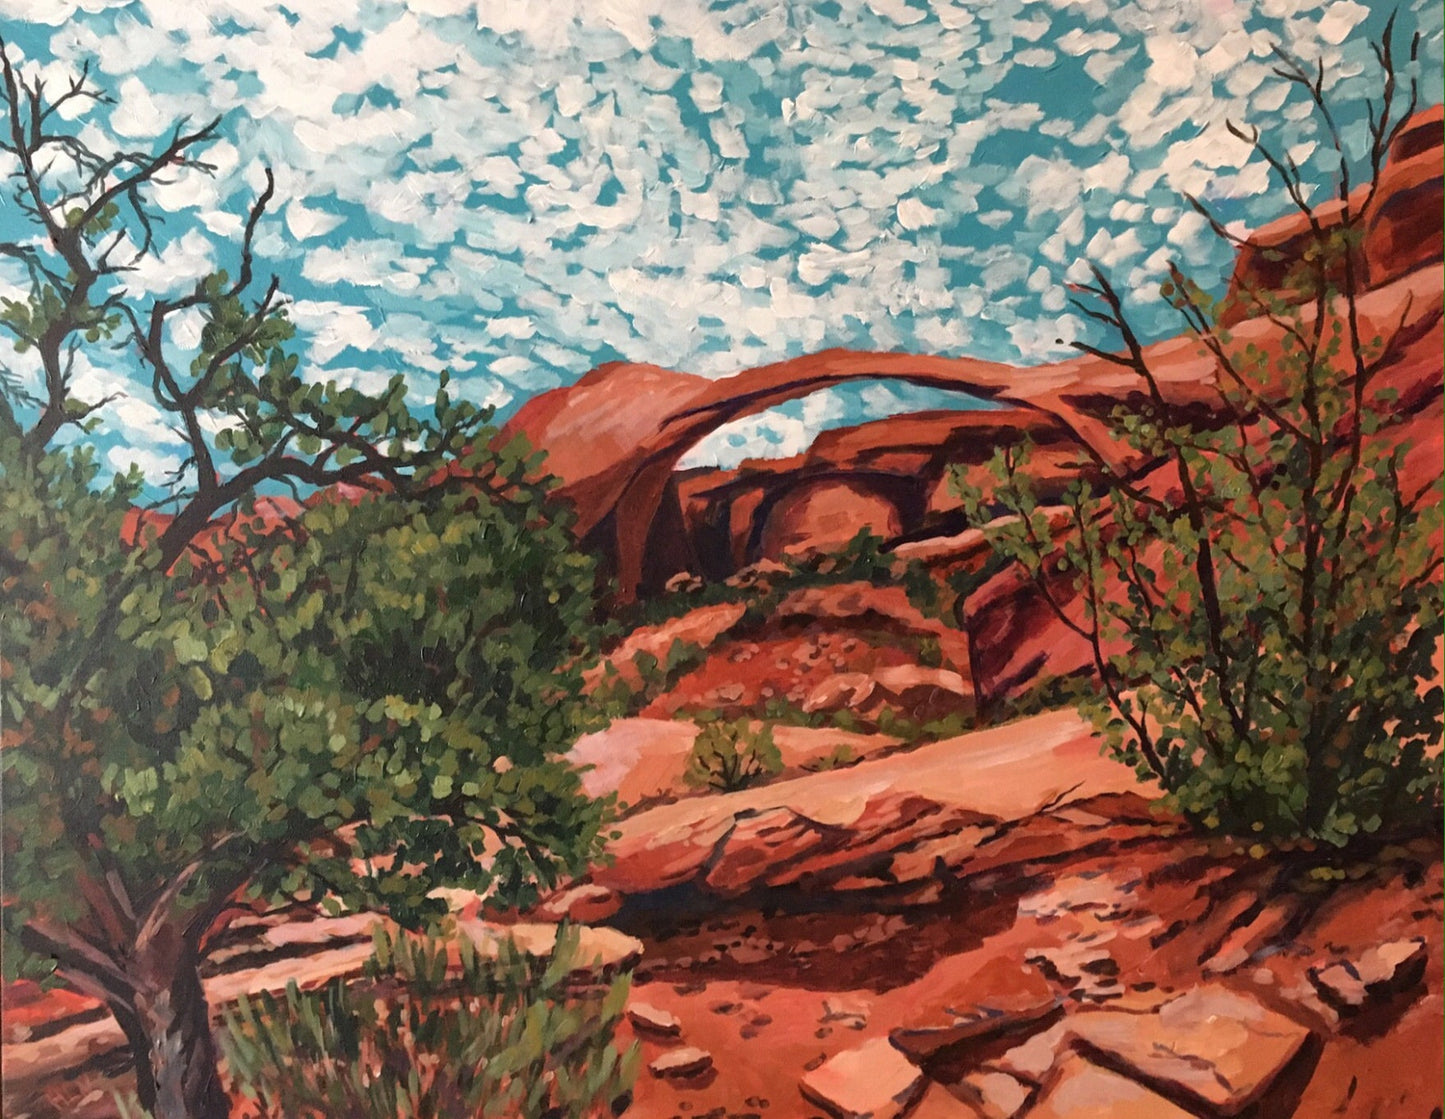 Painting of the Pinyon Pines with Landscape Arch in the background from Arches National Park